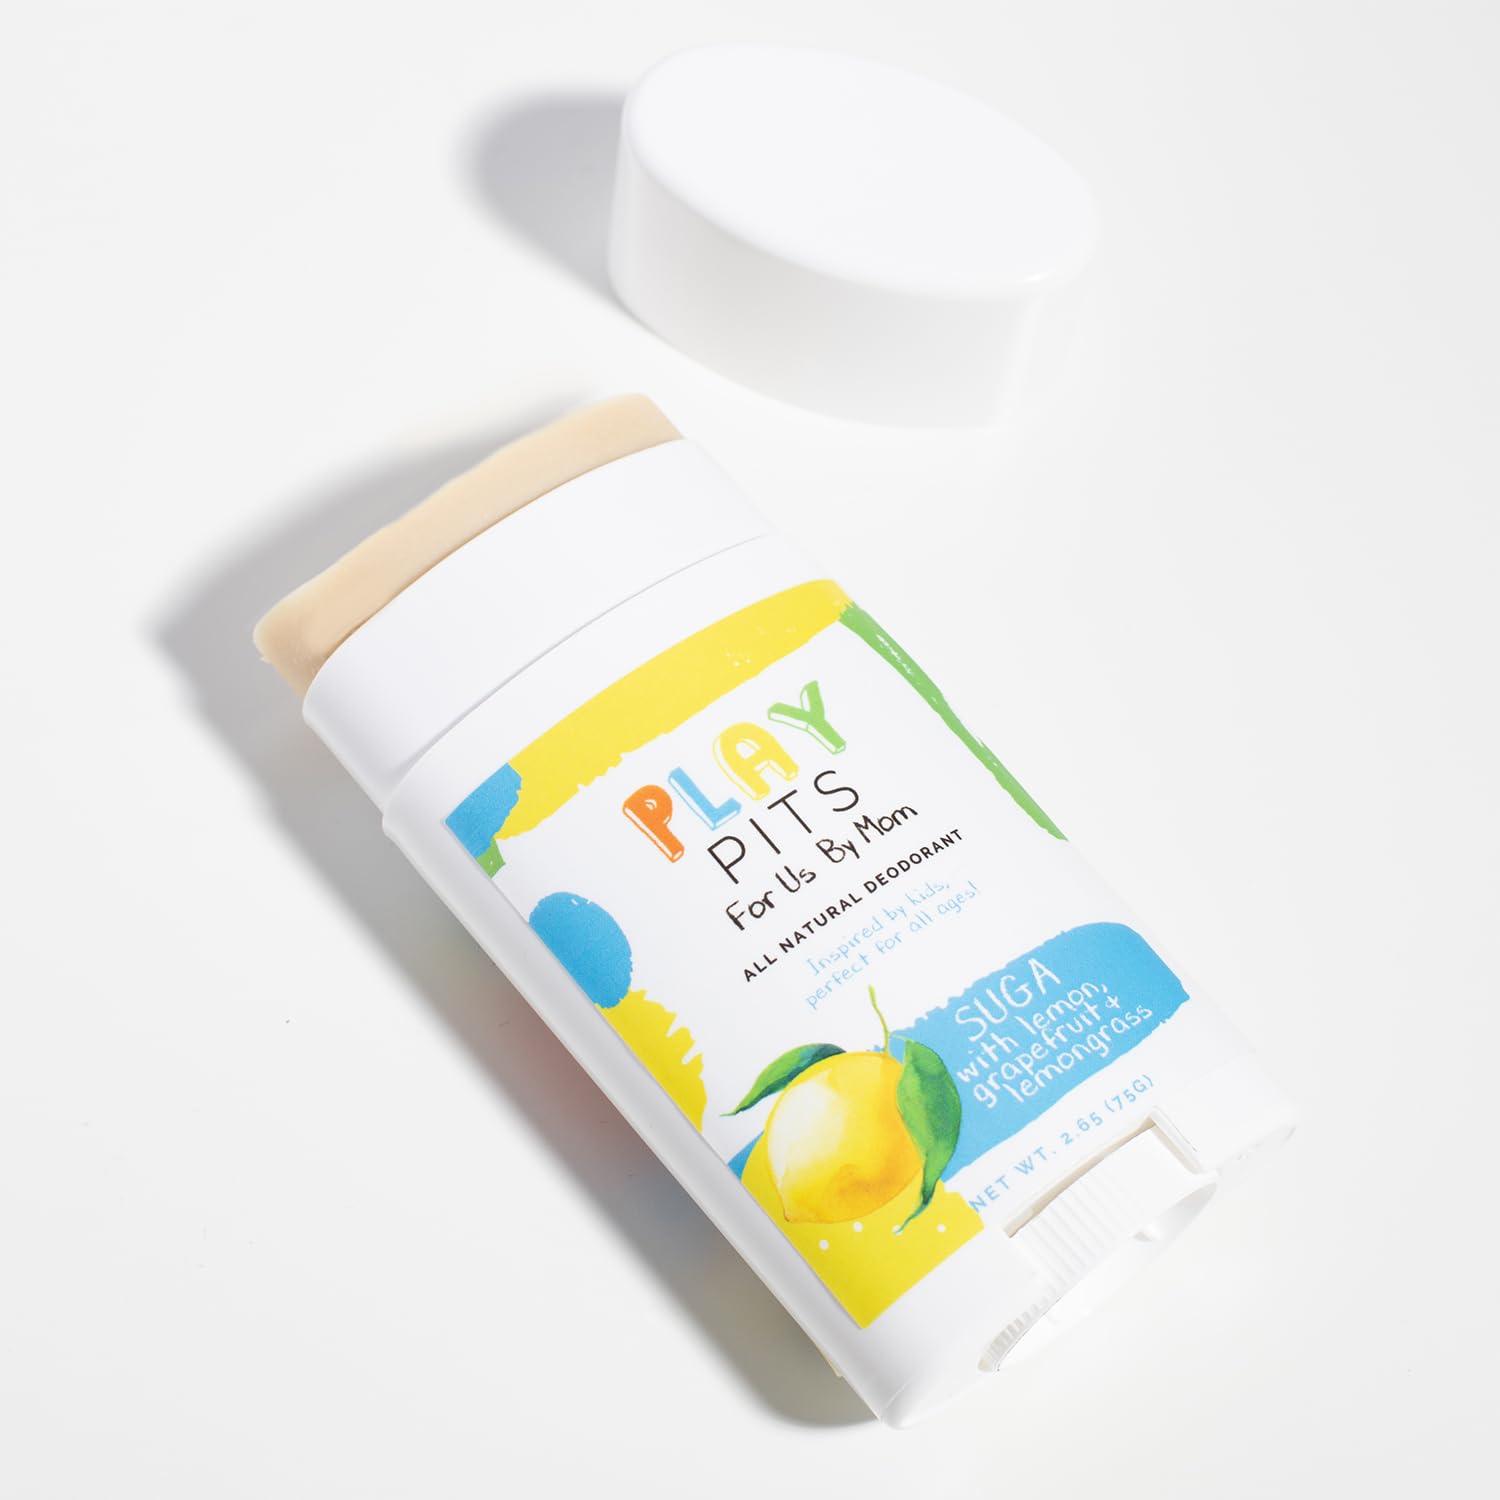 PLAY PITS - Natural Kids Deodorant - Safe for Girls and Boys with Sensitive Skin of All Ages - Aluminum Free - SUGA Scent - Infused with Lemon, Grapefruit, & Lemongrass Essential Oils - 2.65 fl.oz